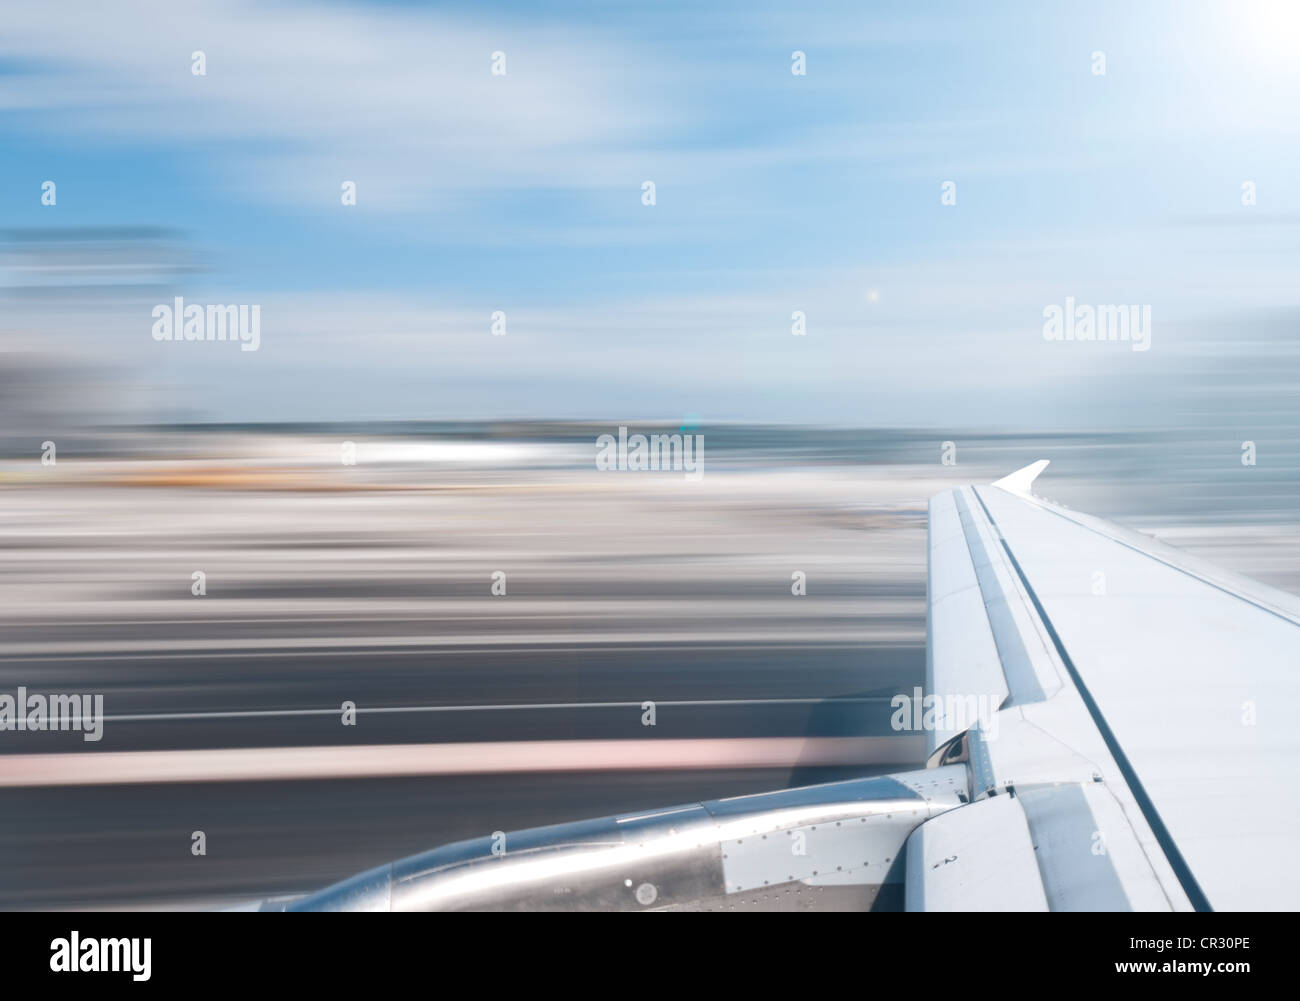 View of air plane wing during take off or landing. Motion blur of airport grounds and sky. Stock Photo